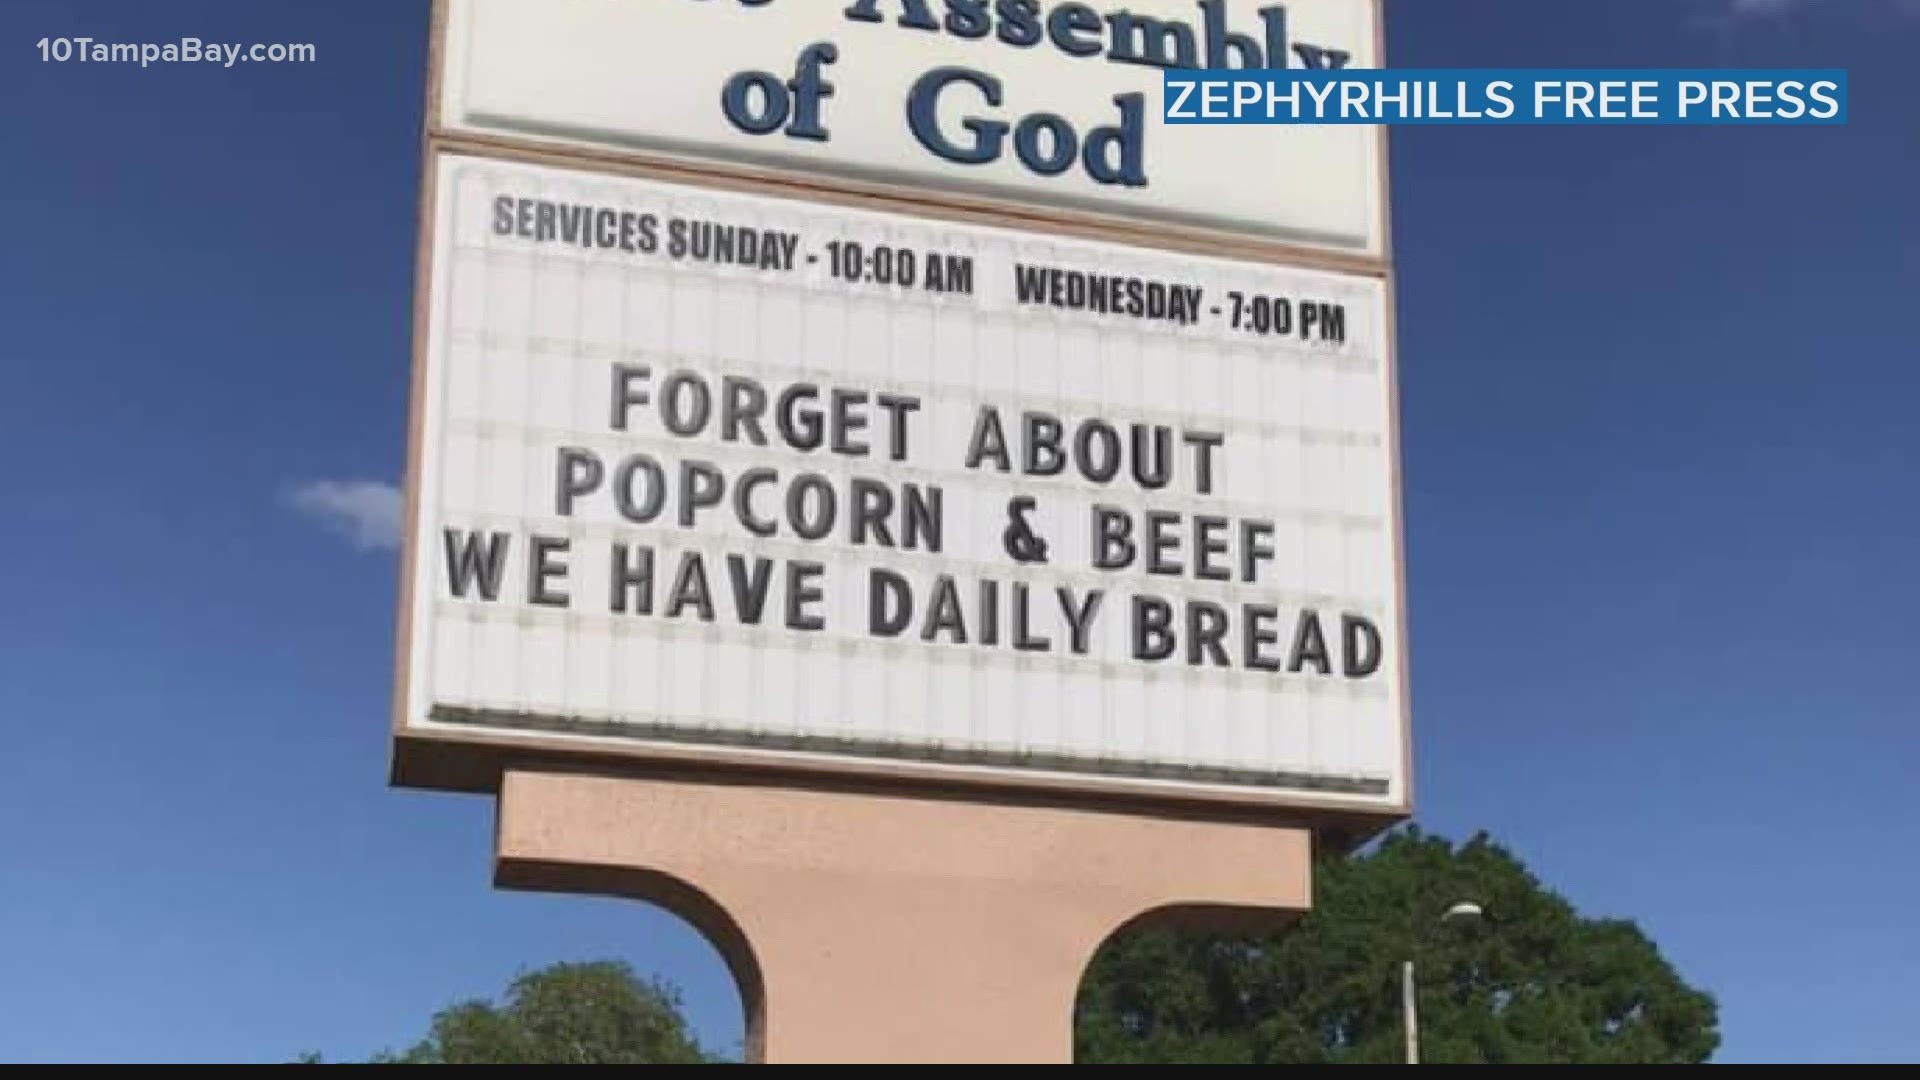 Zephyrhills businesses are caught up in a friendly "battle" to help promote each other and bring in much-needed customers.